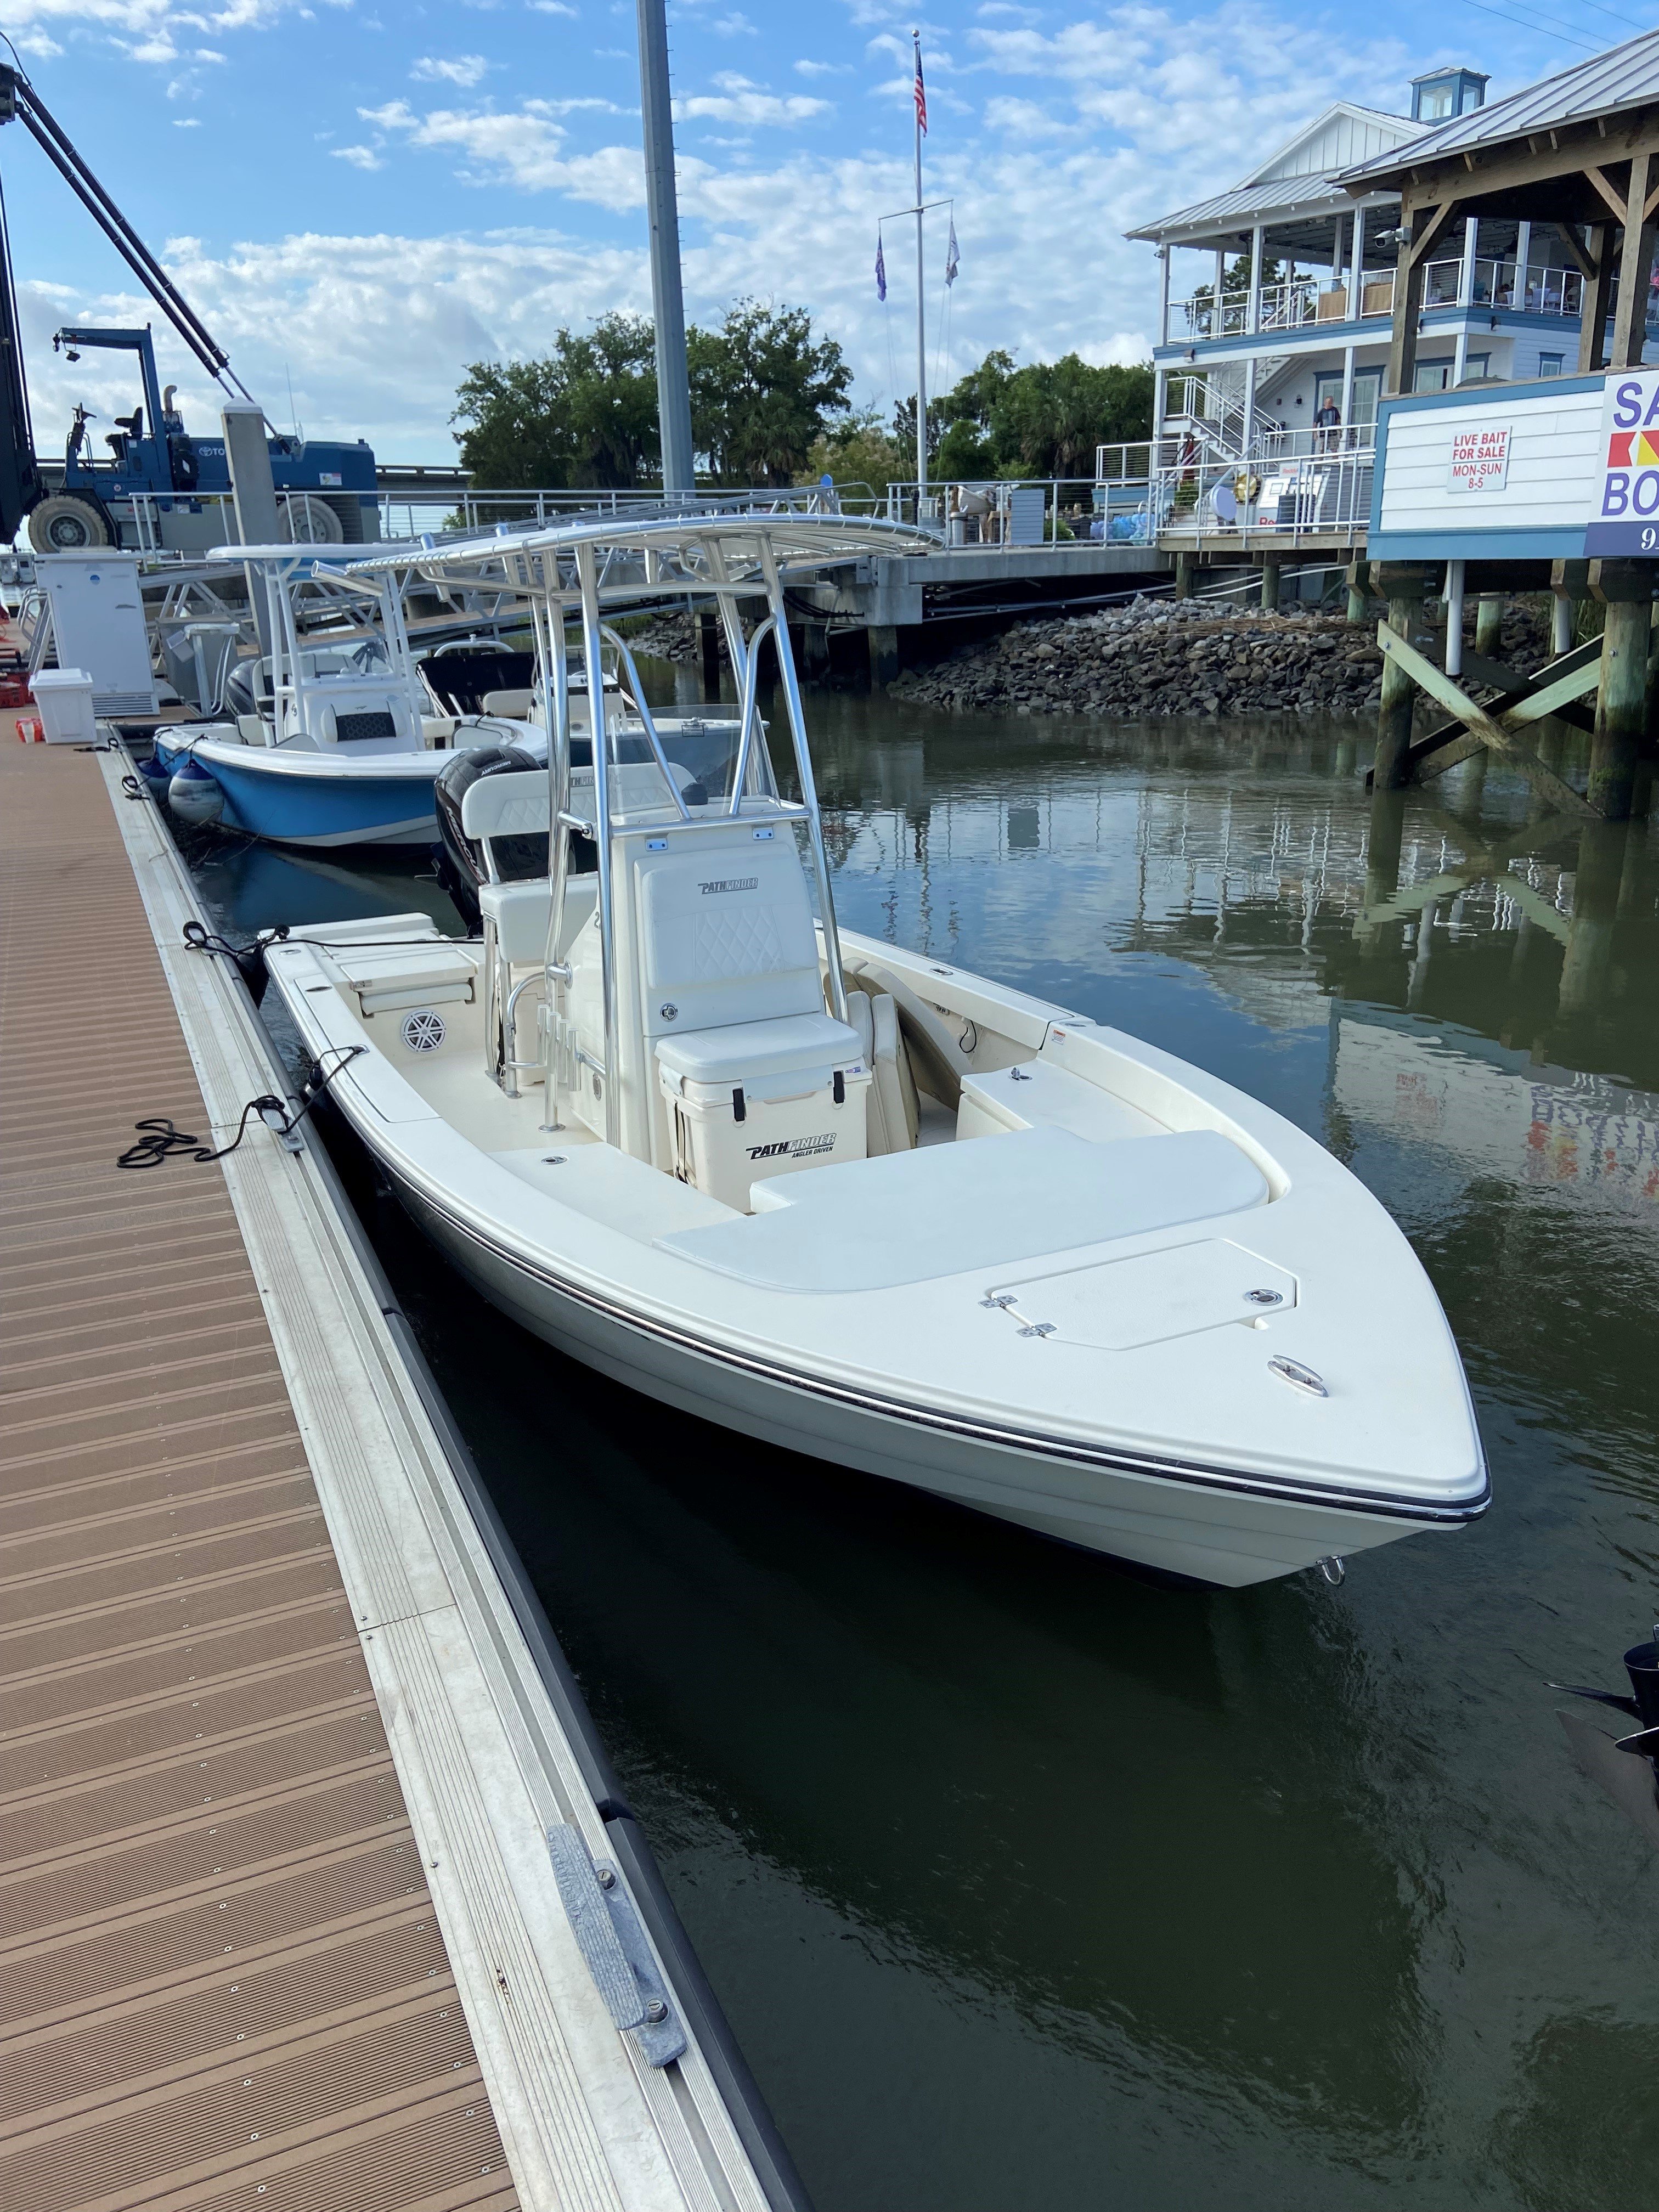 Freedom XL (22FT Center Console Pathfinder 150 HP Fishing)